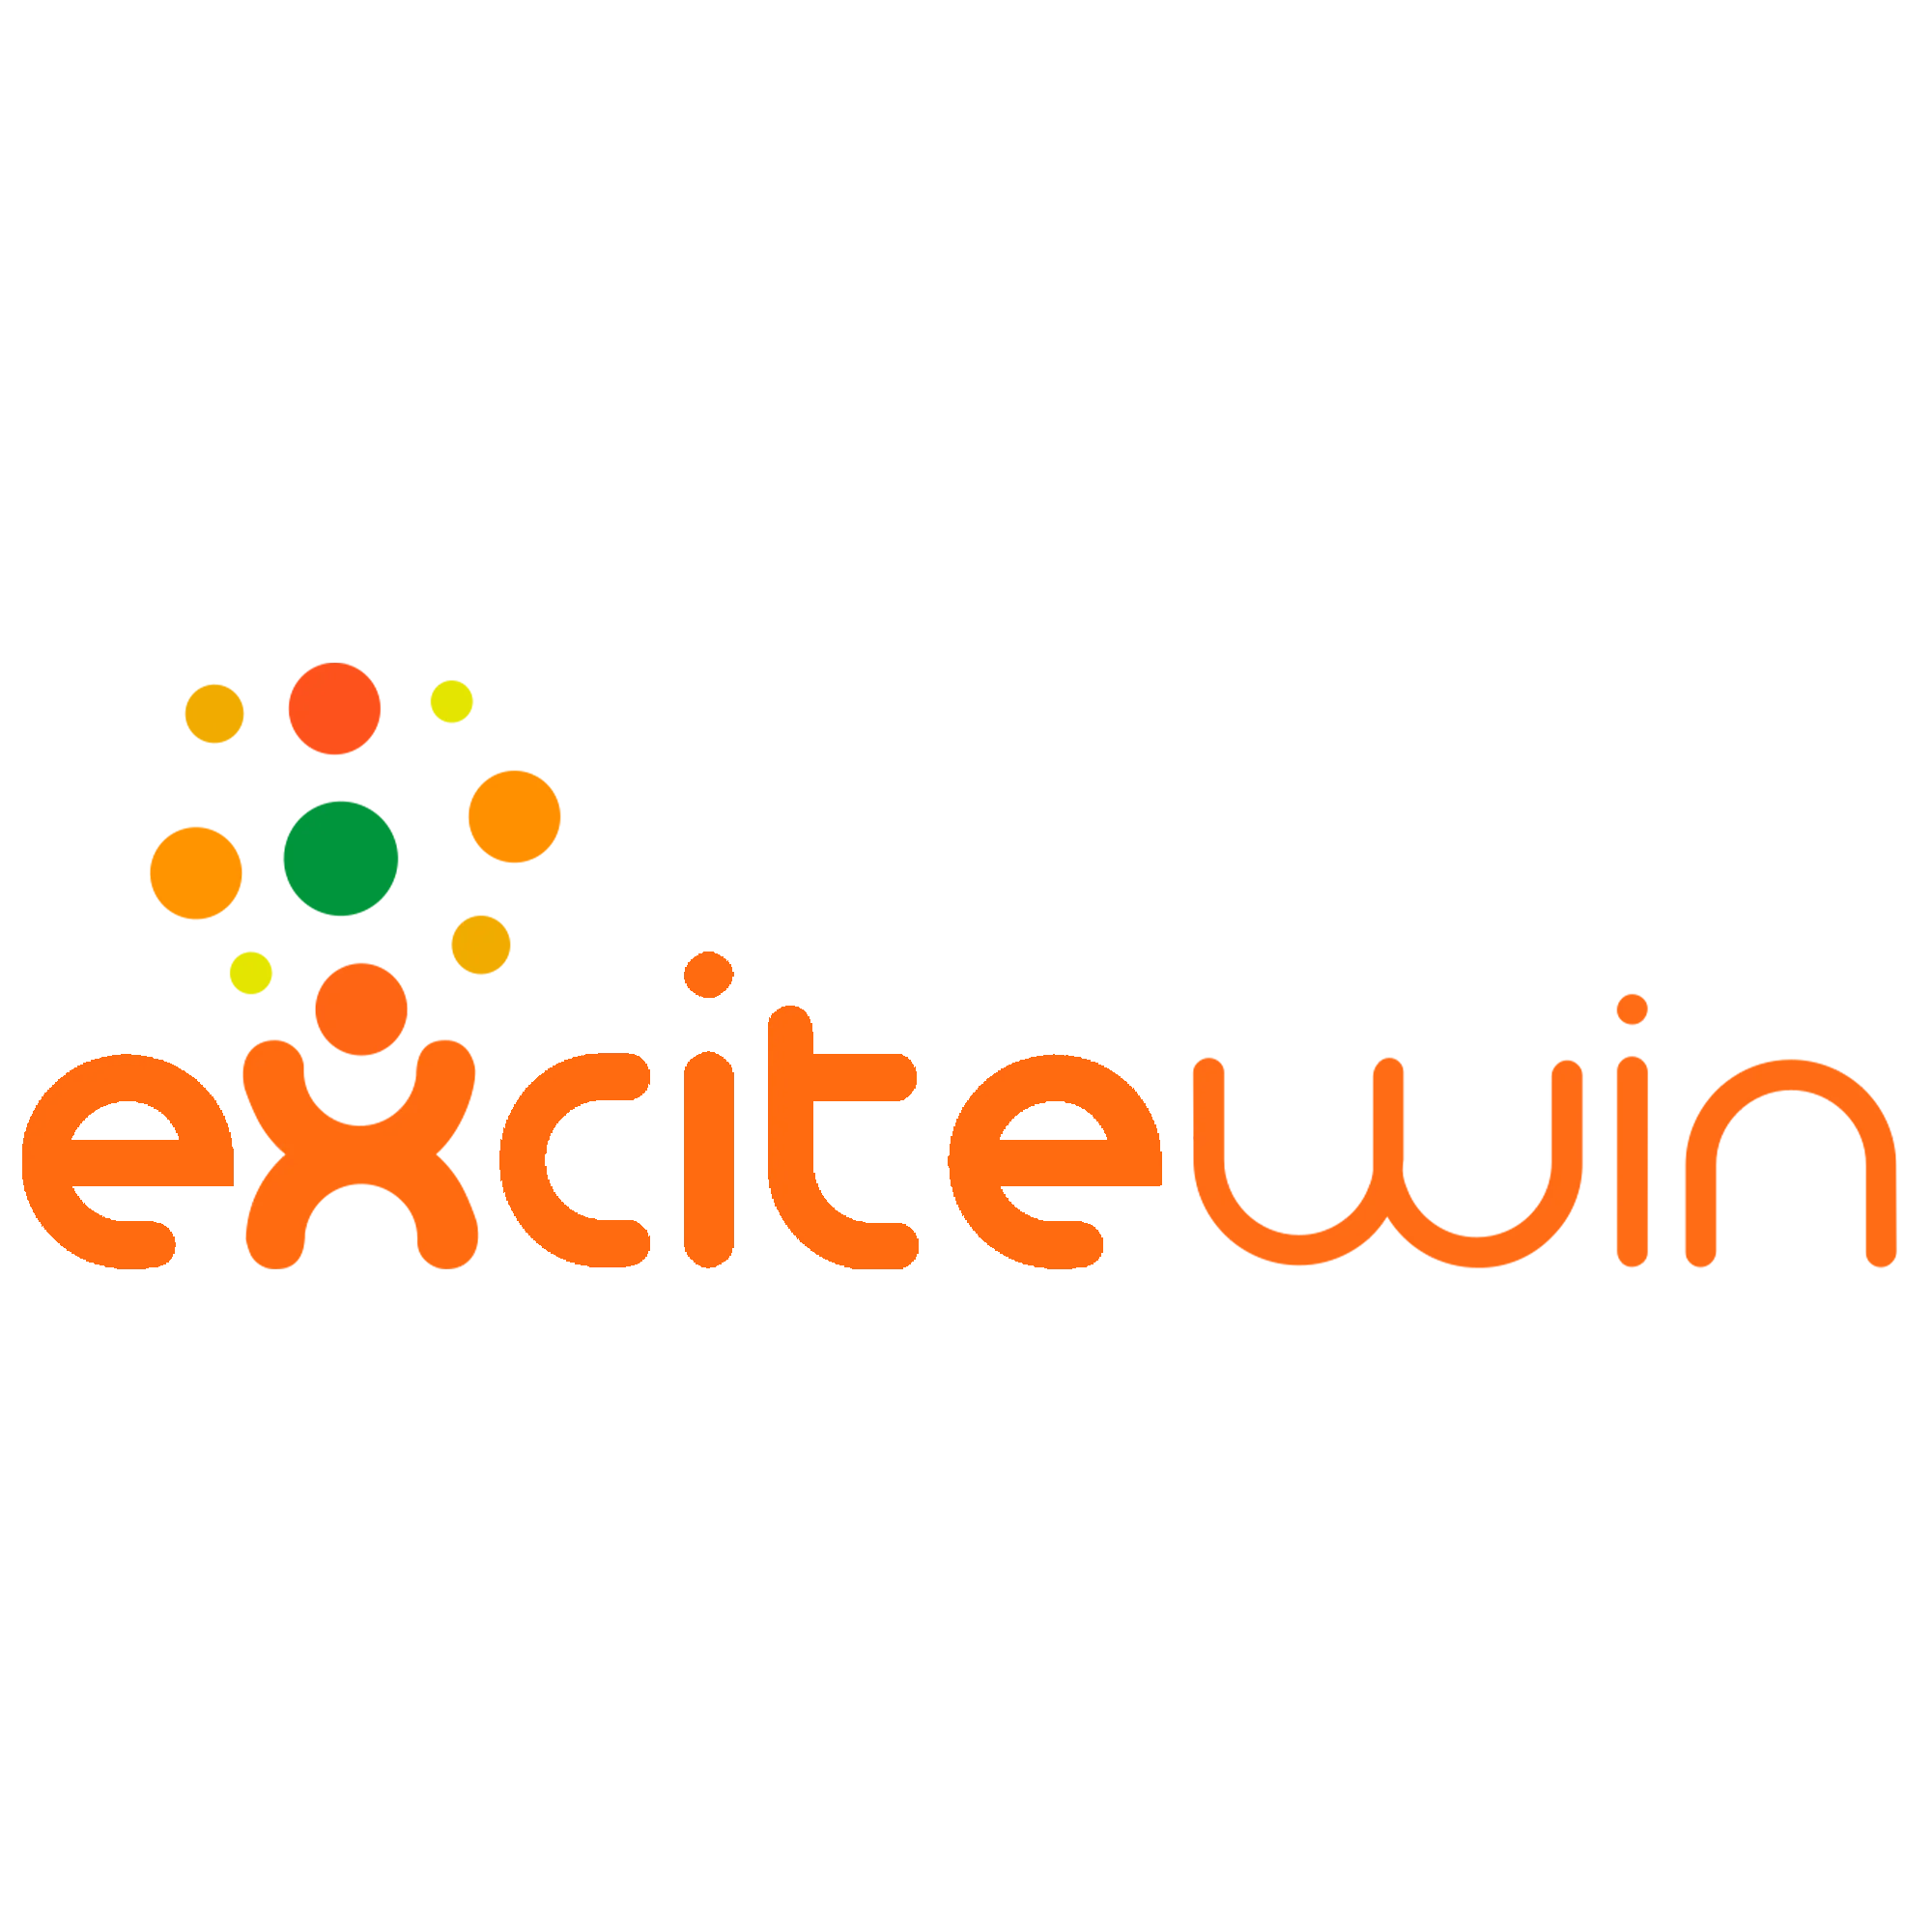 Excitewin Review